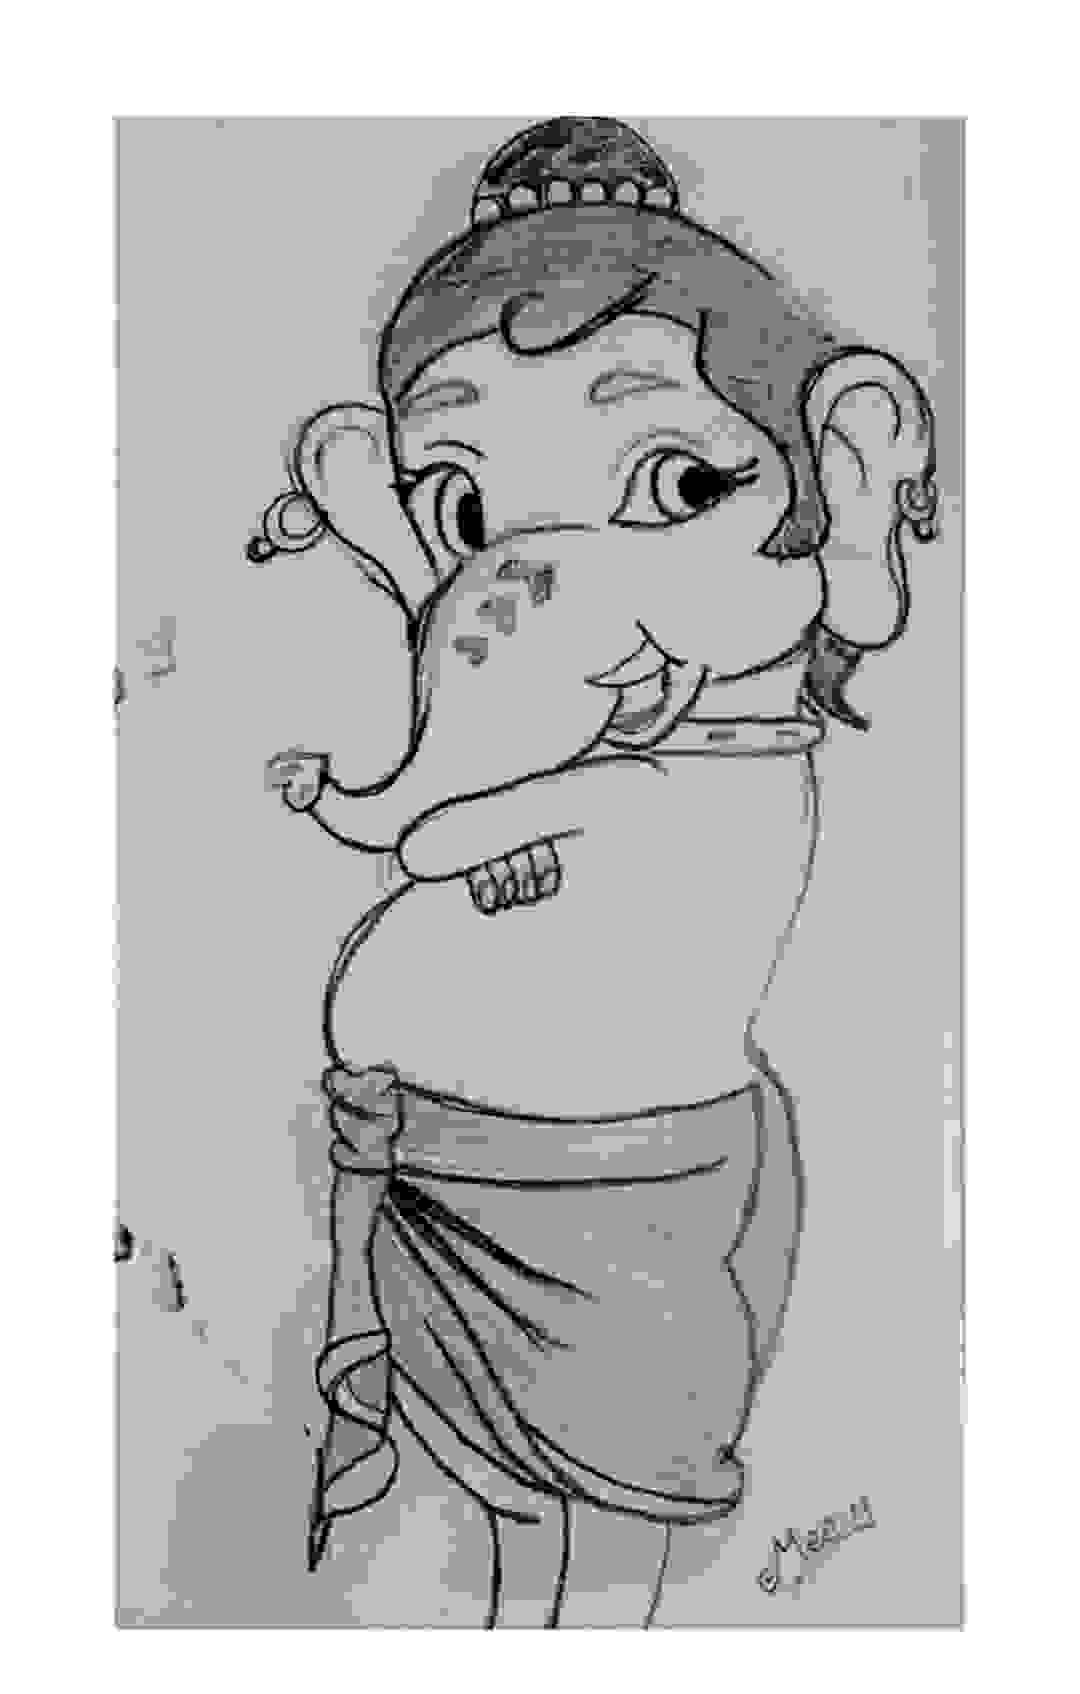 Painting Of Ganesh Pencil Sketch In Instagram Youtube Google Size 15cm